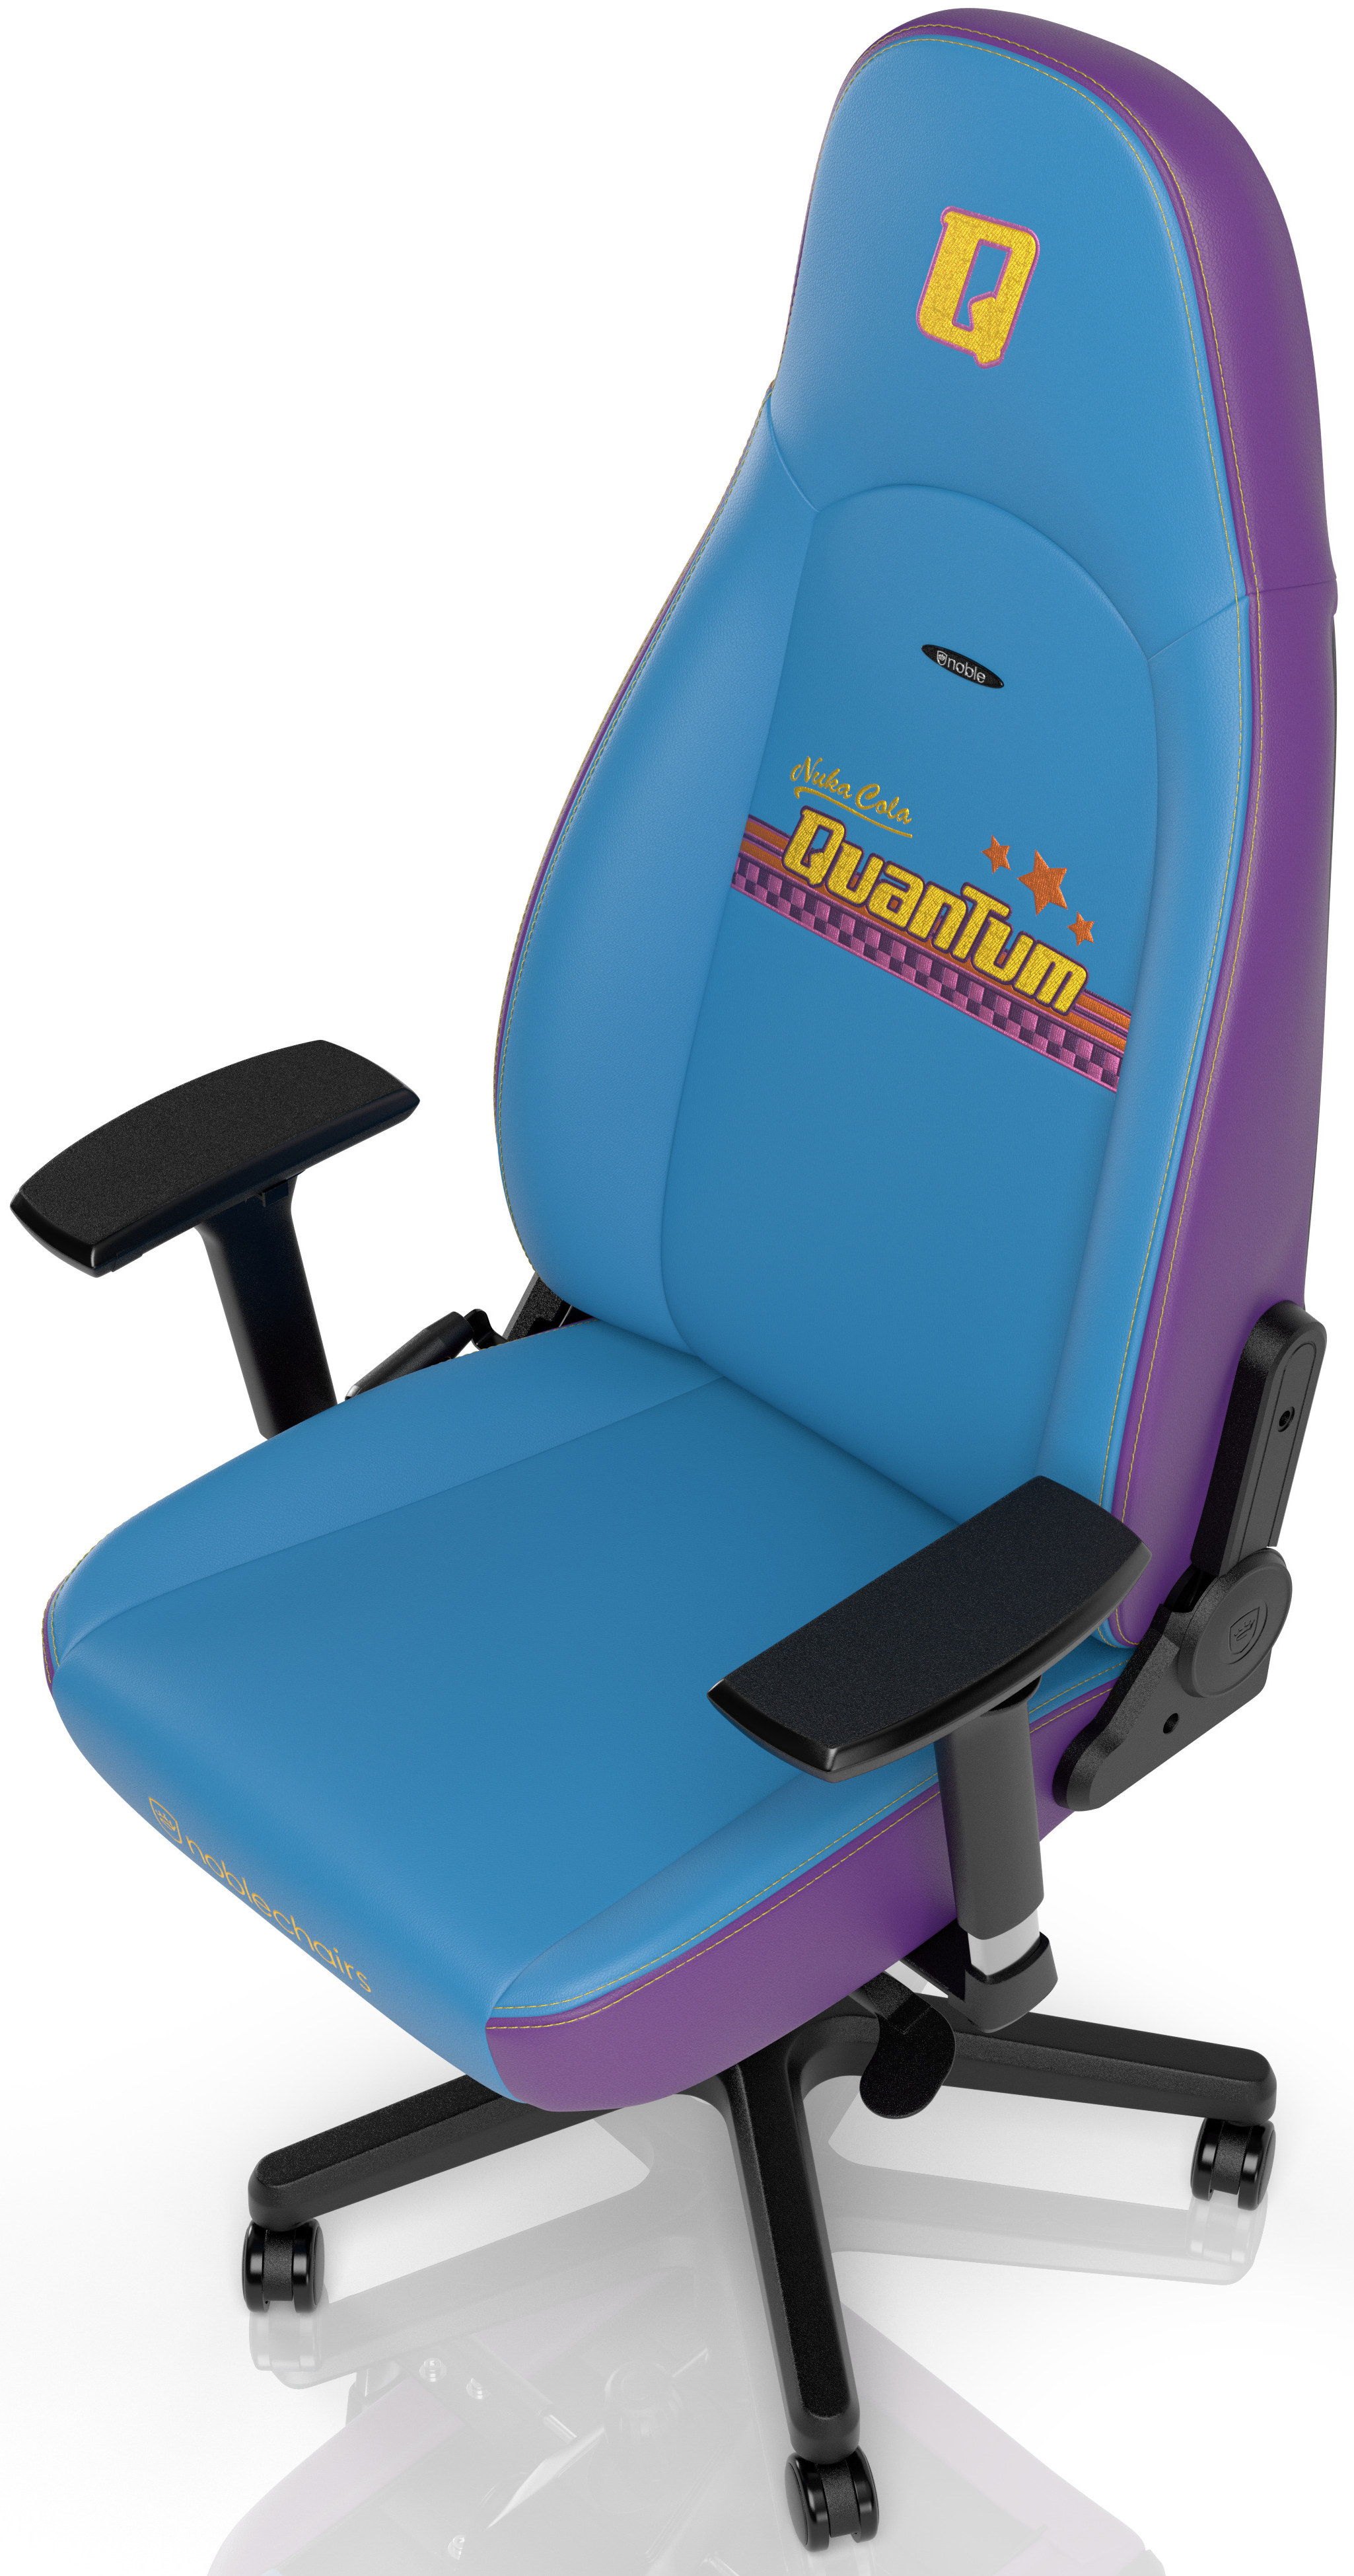 noblechairs - Silla noblechairs ICON - Fallout Nuka-Cola Quantum Edition